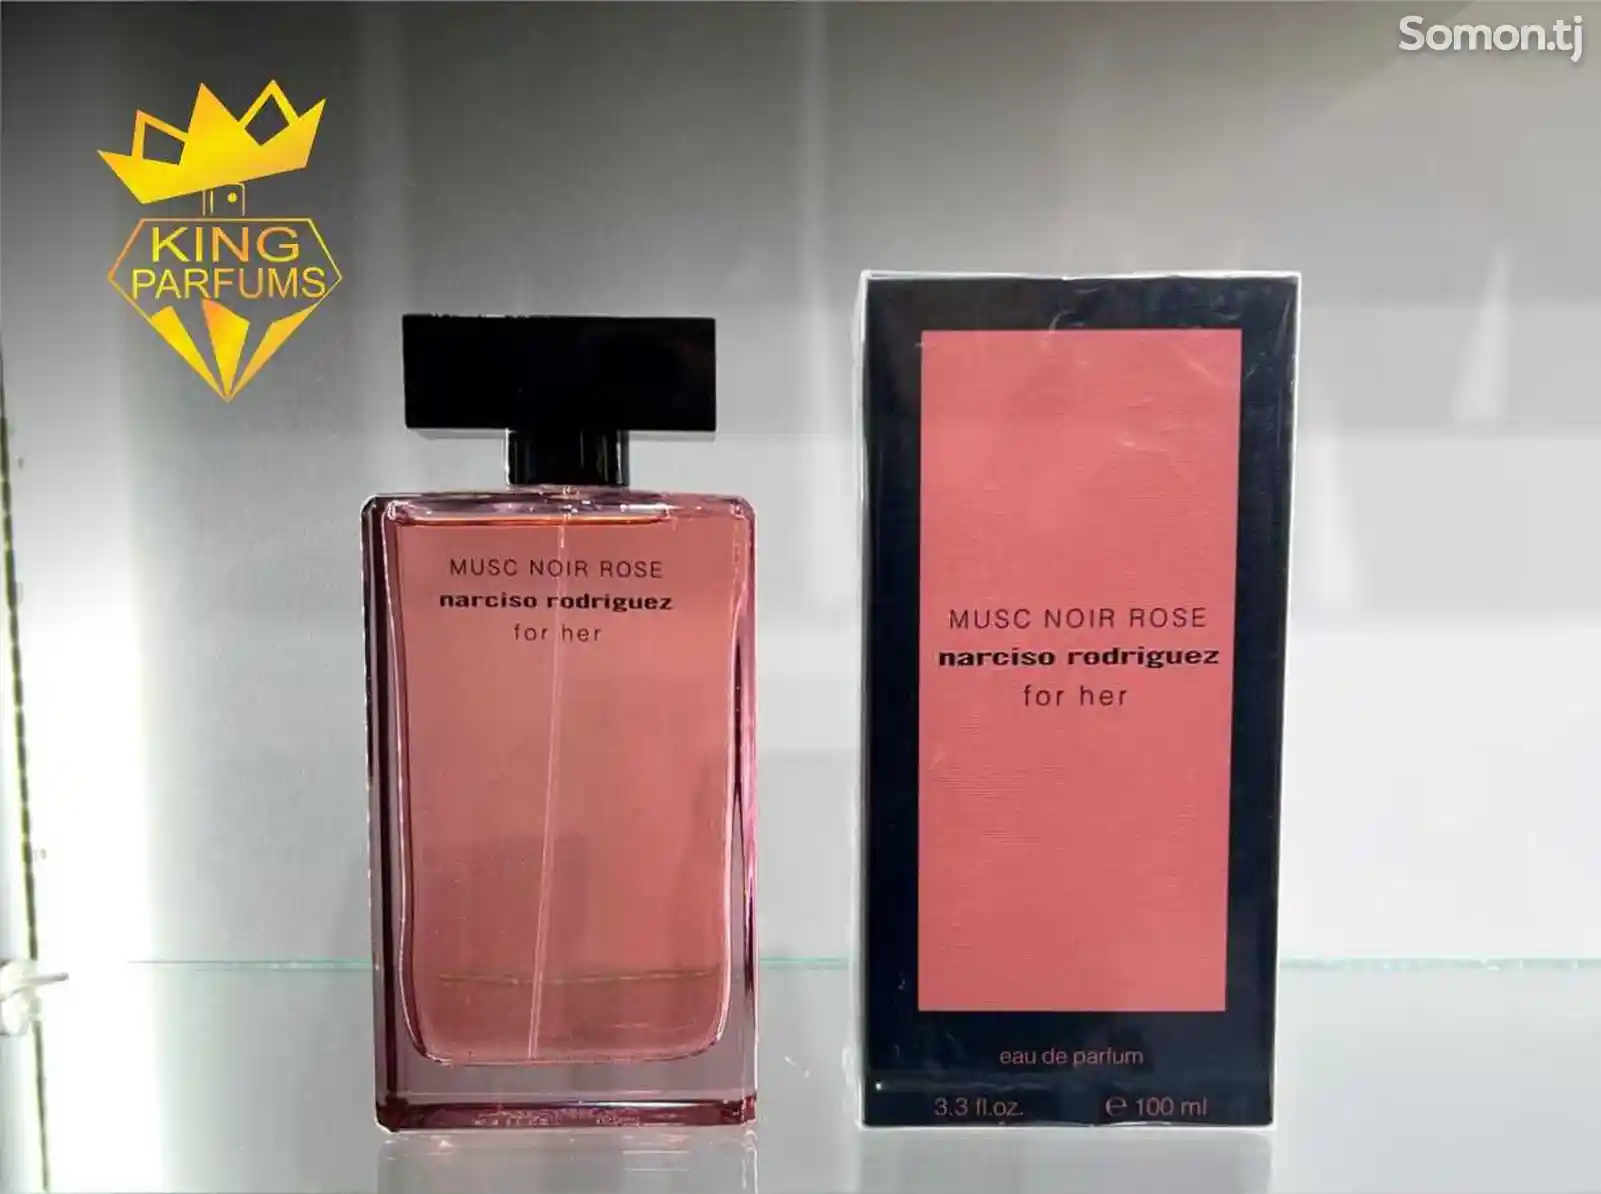 Парфюм Musk noir rose for her narciso rodriguez-1